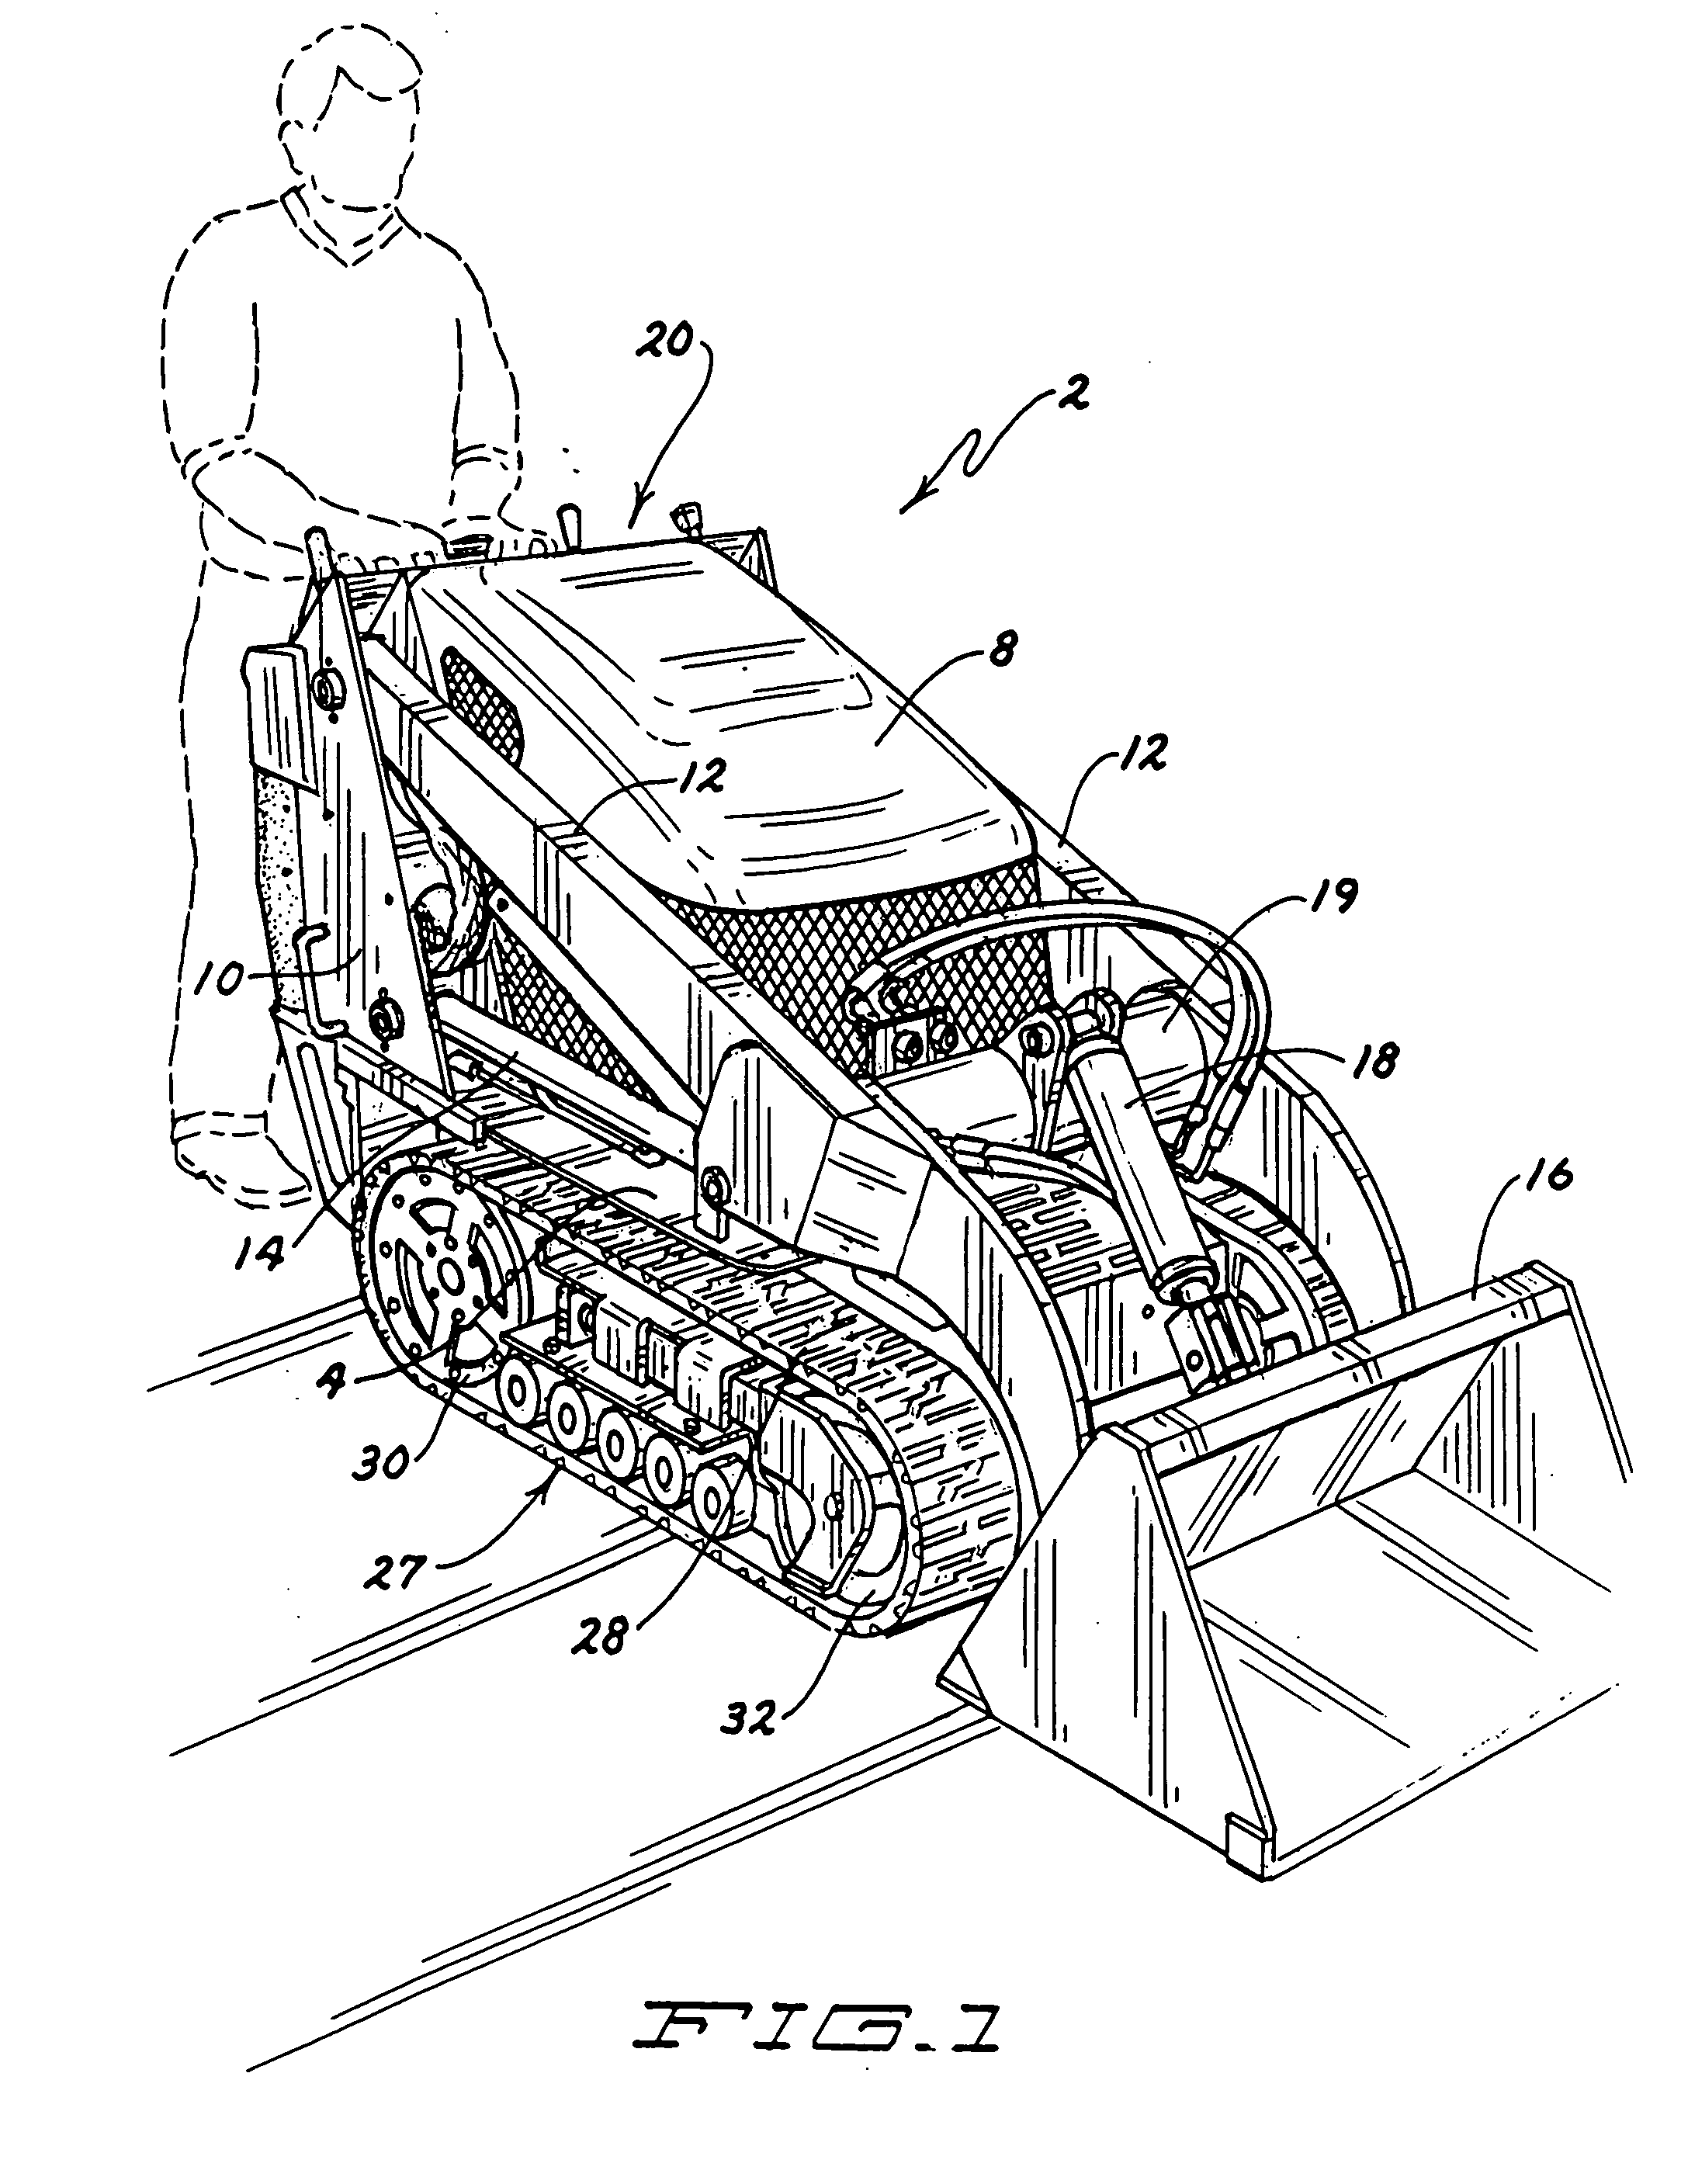 Tracked compact utility loader